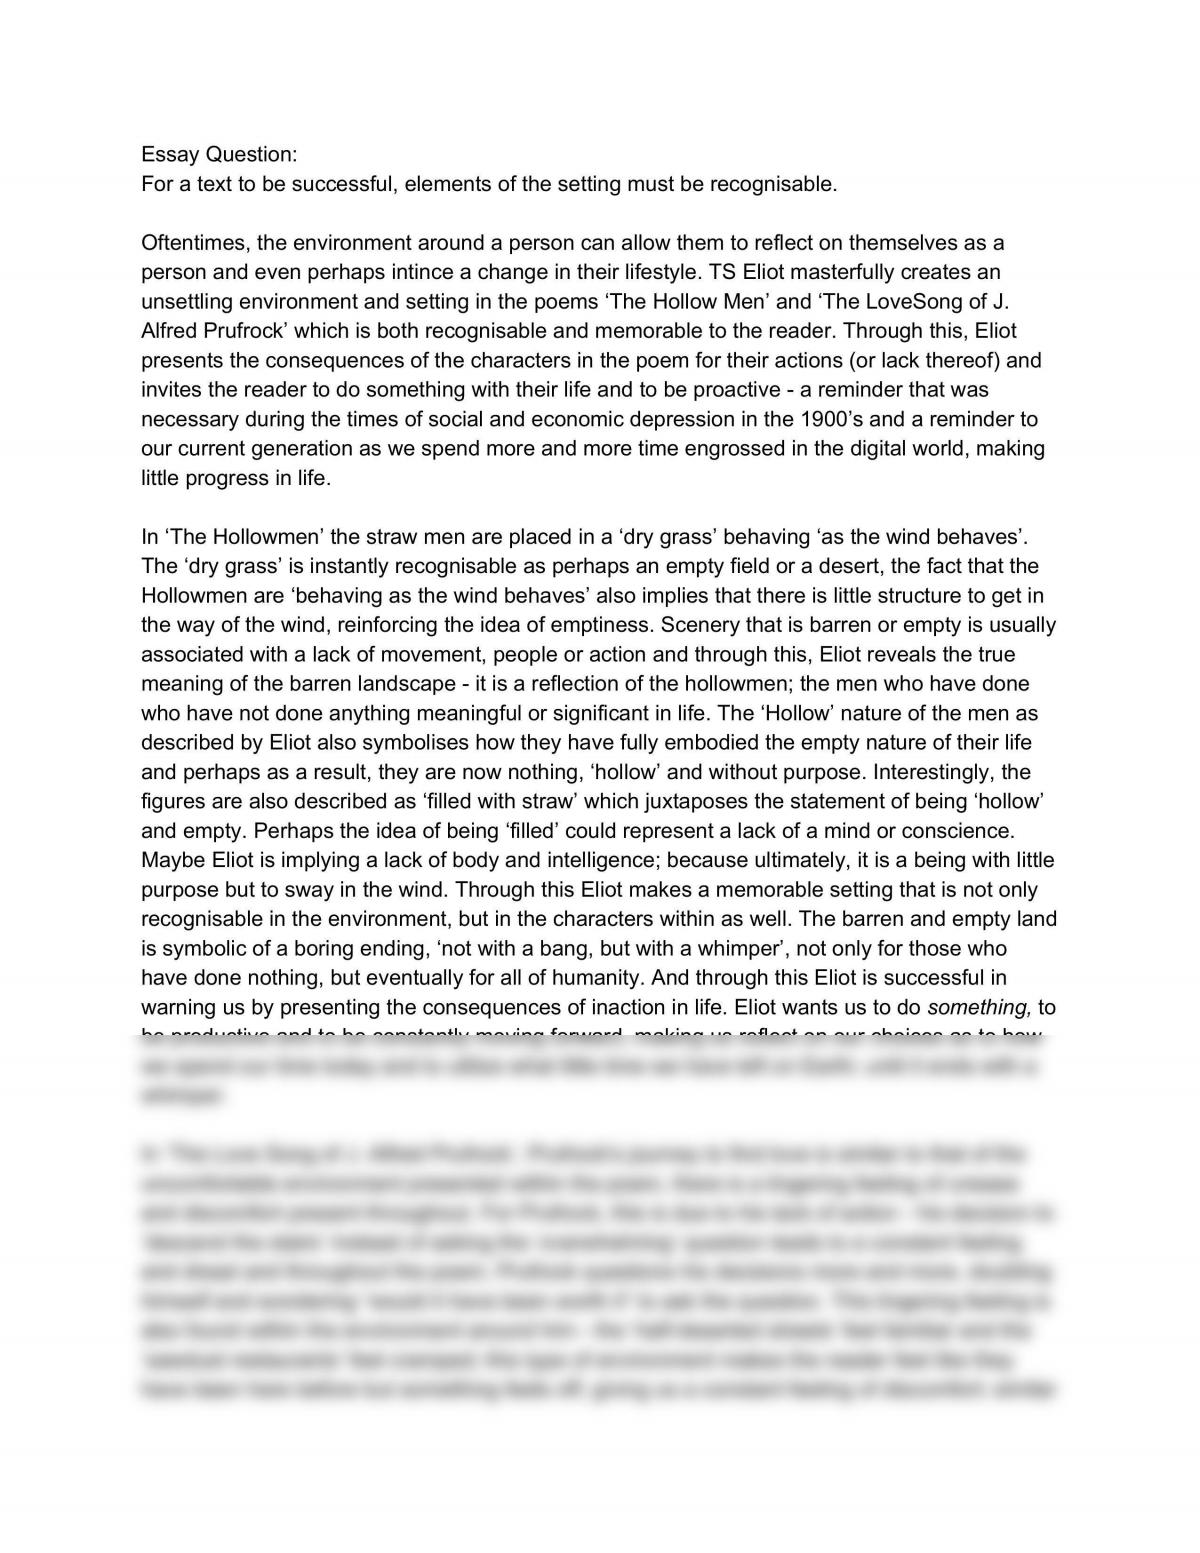 Essay for Level 3 English on J. Alfred Prudck and The Hollowmen by T.S Eliot - Page 1